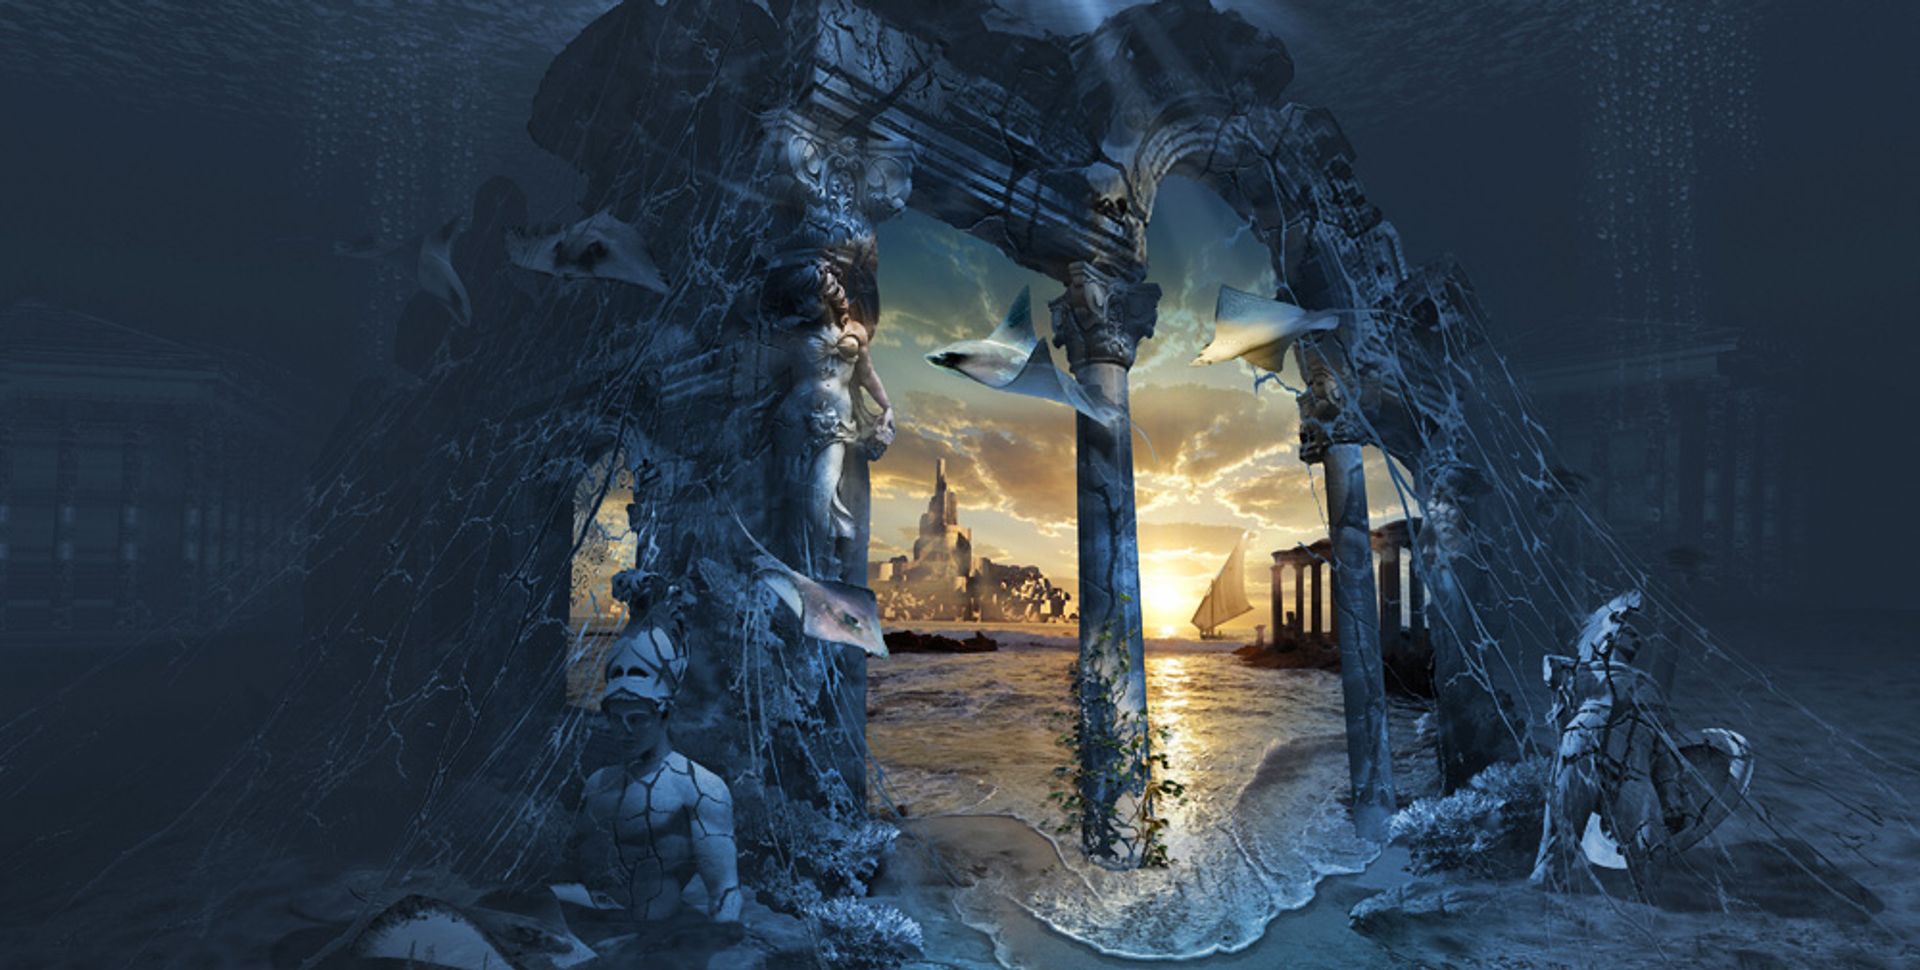 An artist's vision of the lost city of Atlantis An artist's vision of the lost city of Atlantis. Photo: George Grie